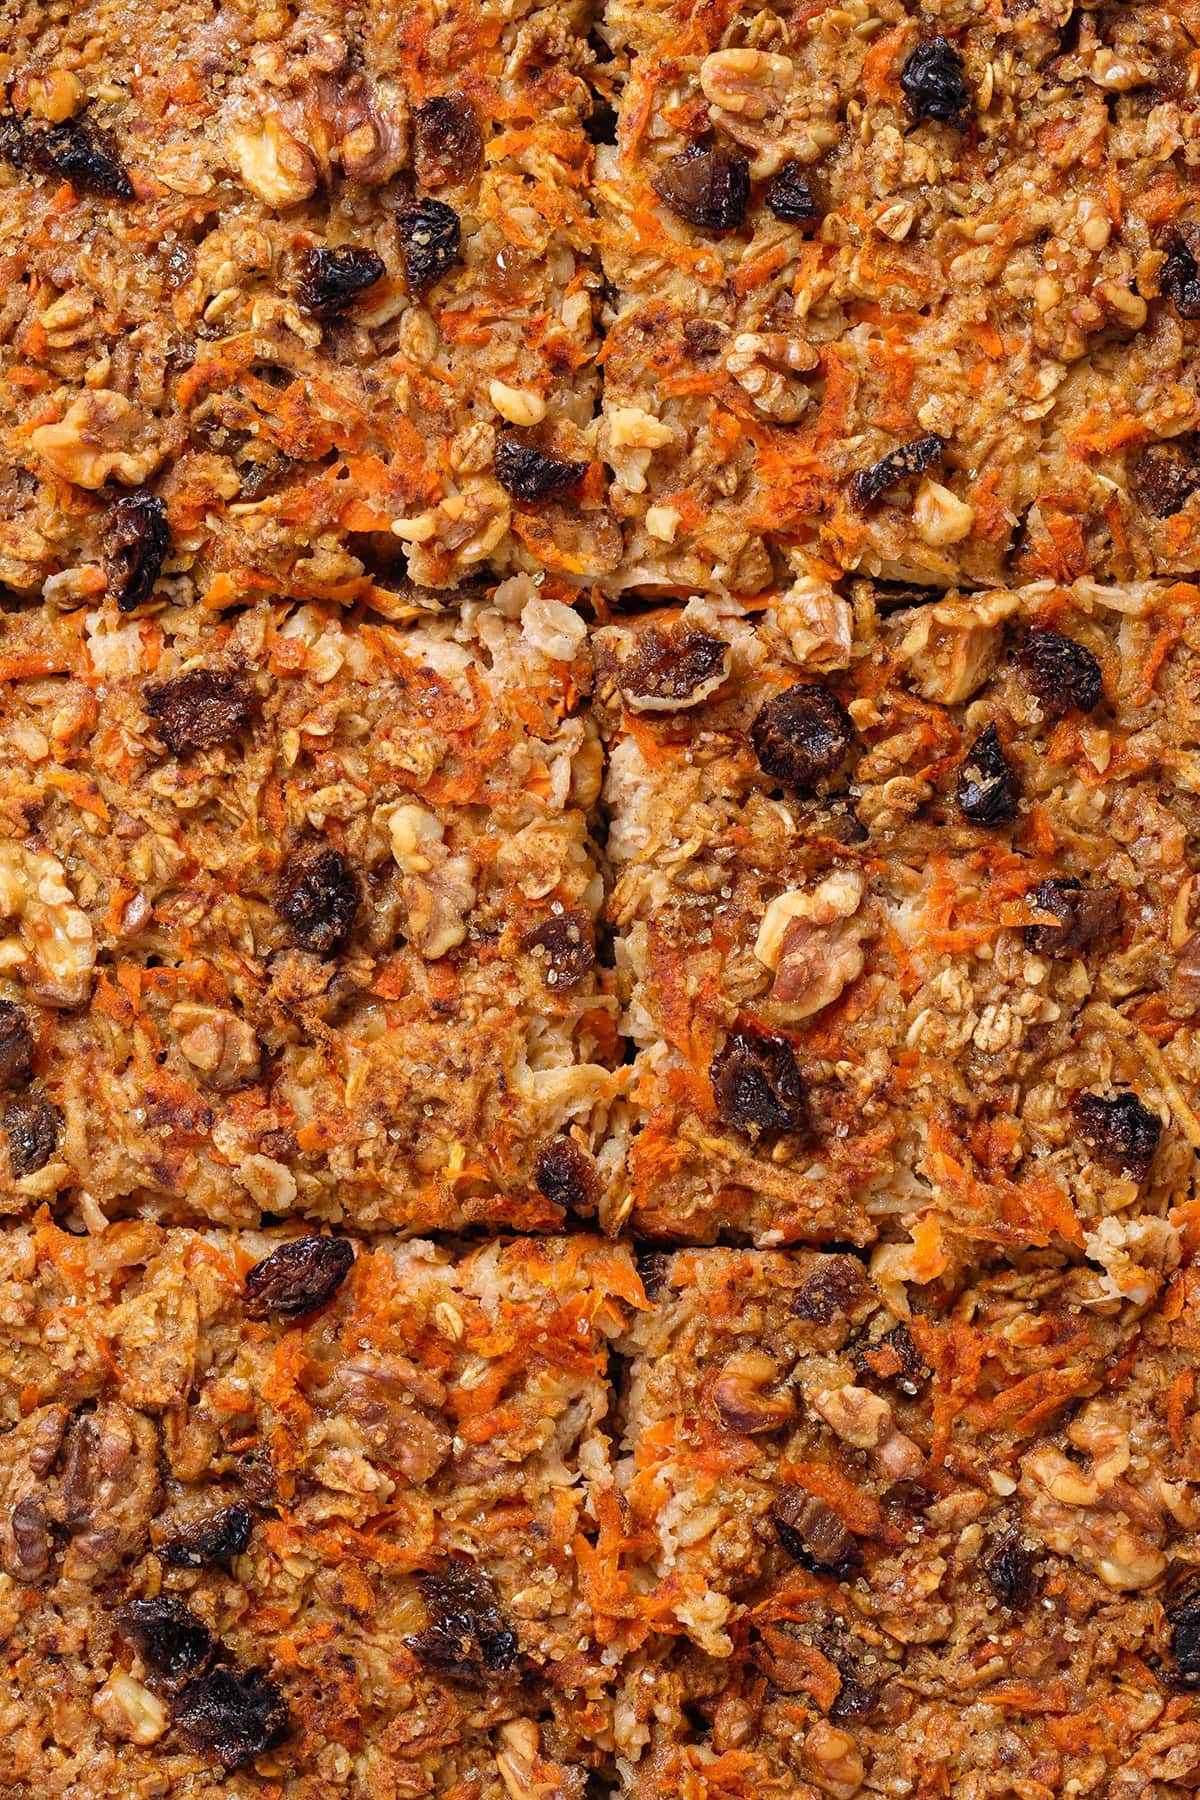 Carrot cake baked oatmeal sliced into six pieces showing crispy texture on top after baking.